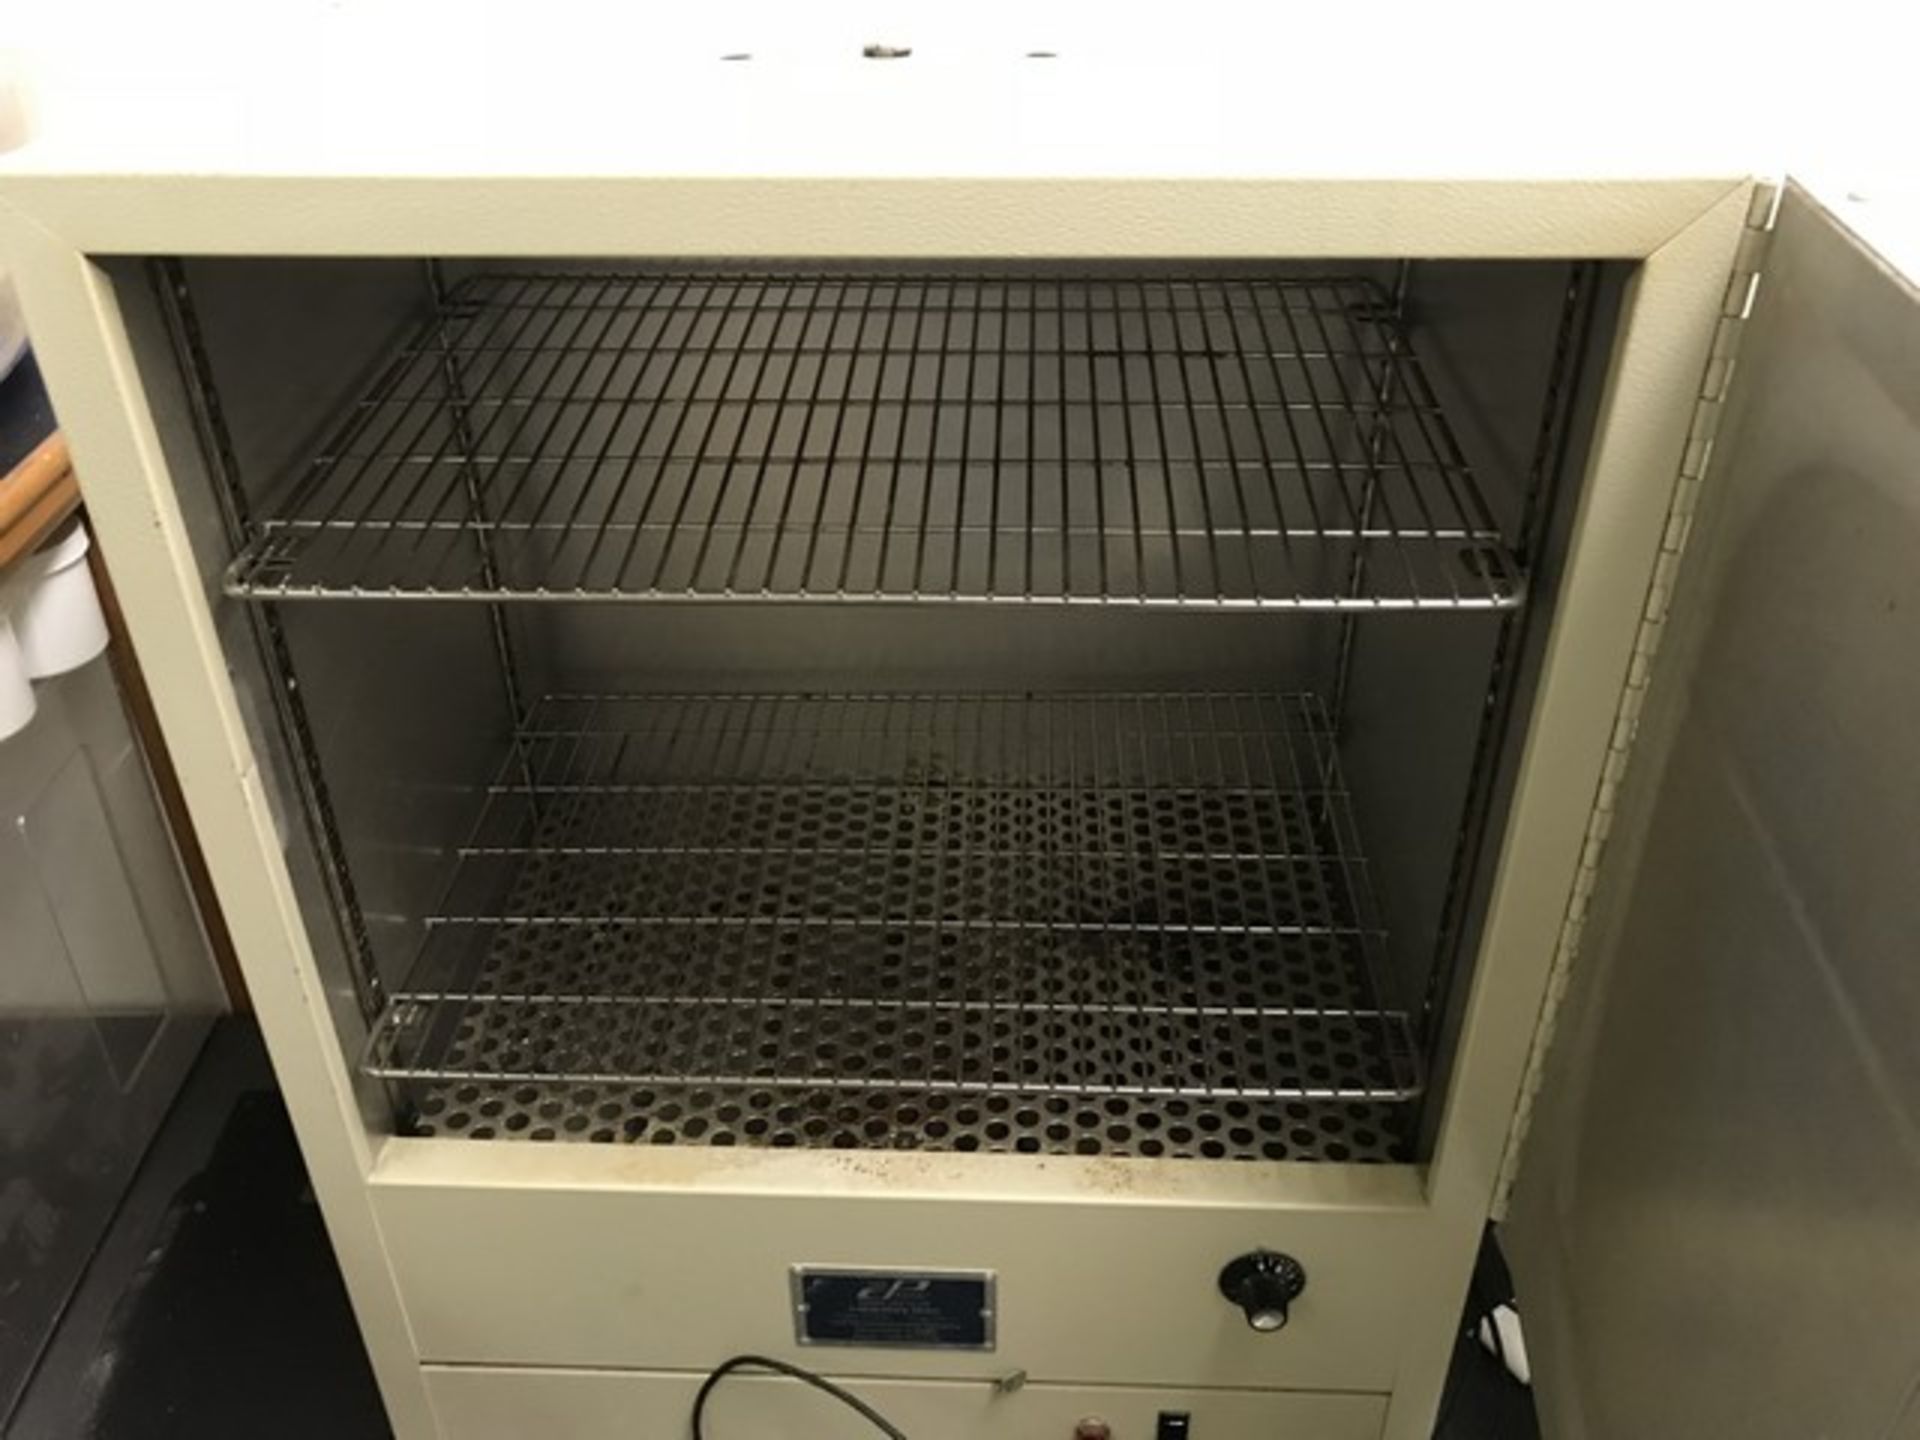 COLE PARMER 05015-58 LAB OVEN - Image 3 of 3